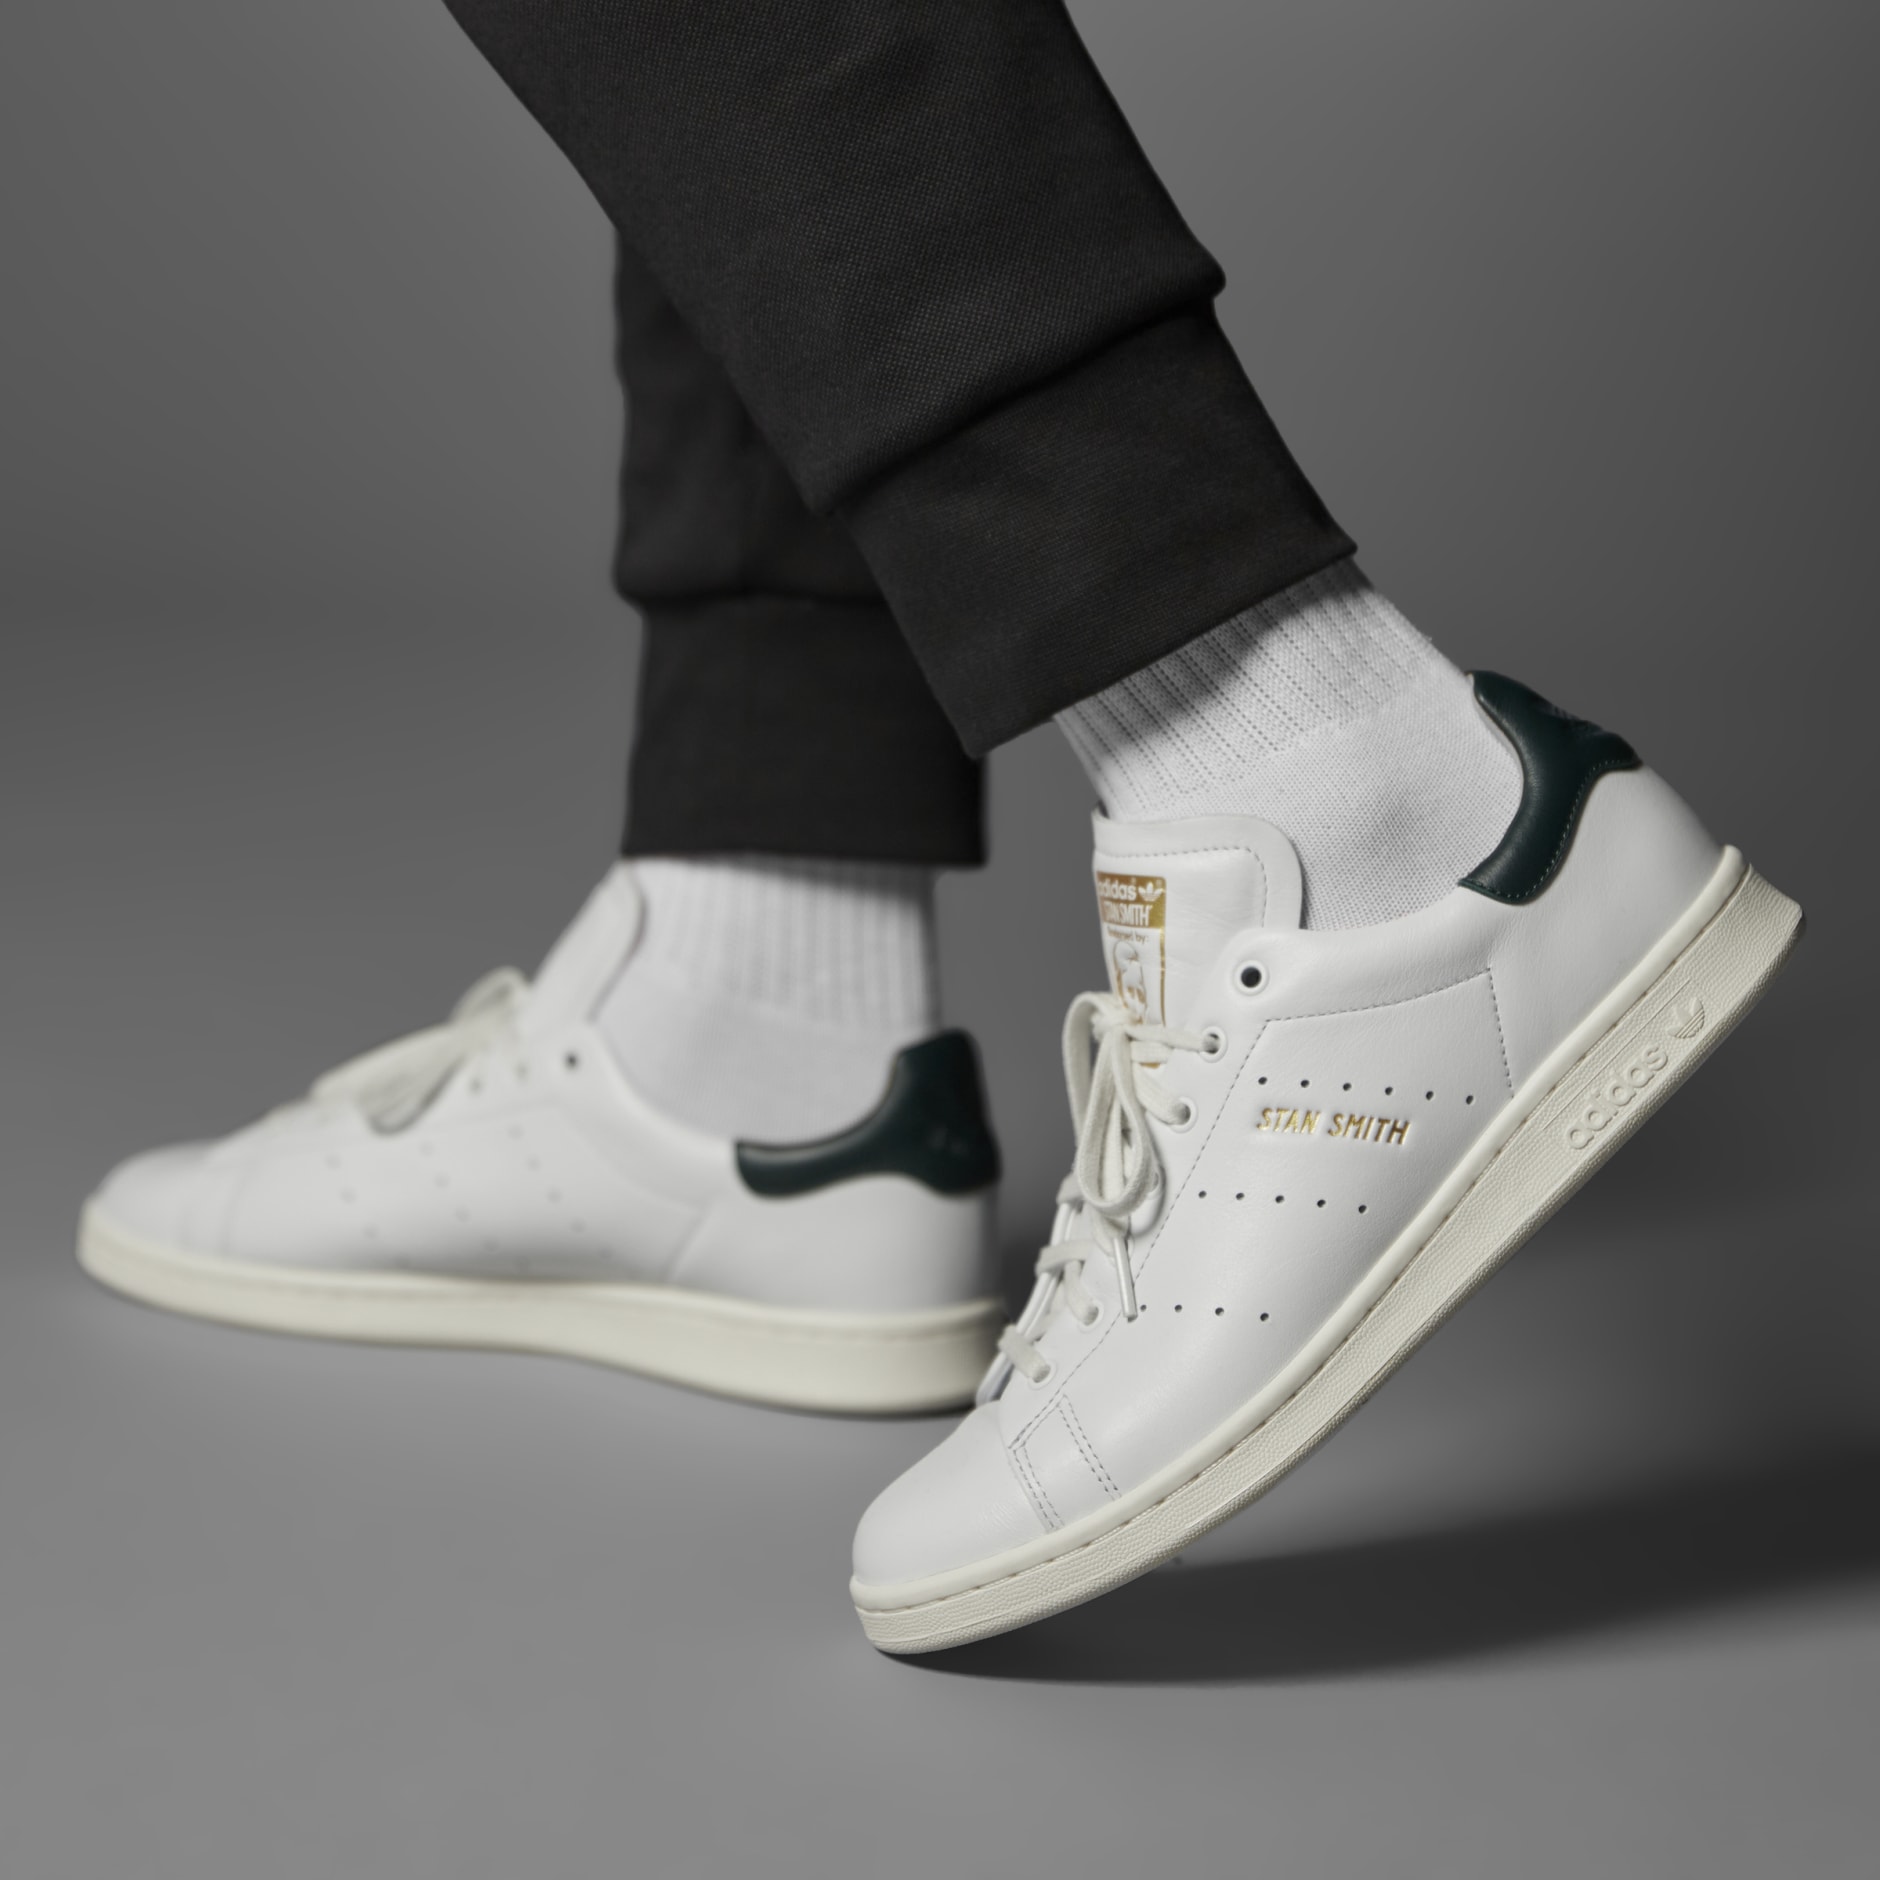 The adidas Stan Smith sneaker: One of the Most Popular Shoes of All Ti